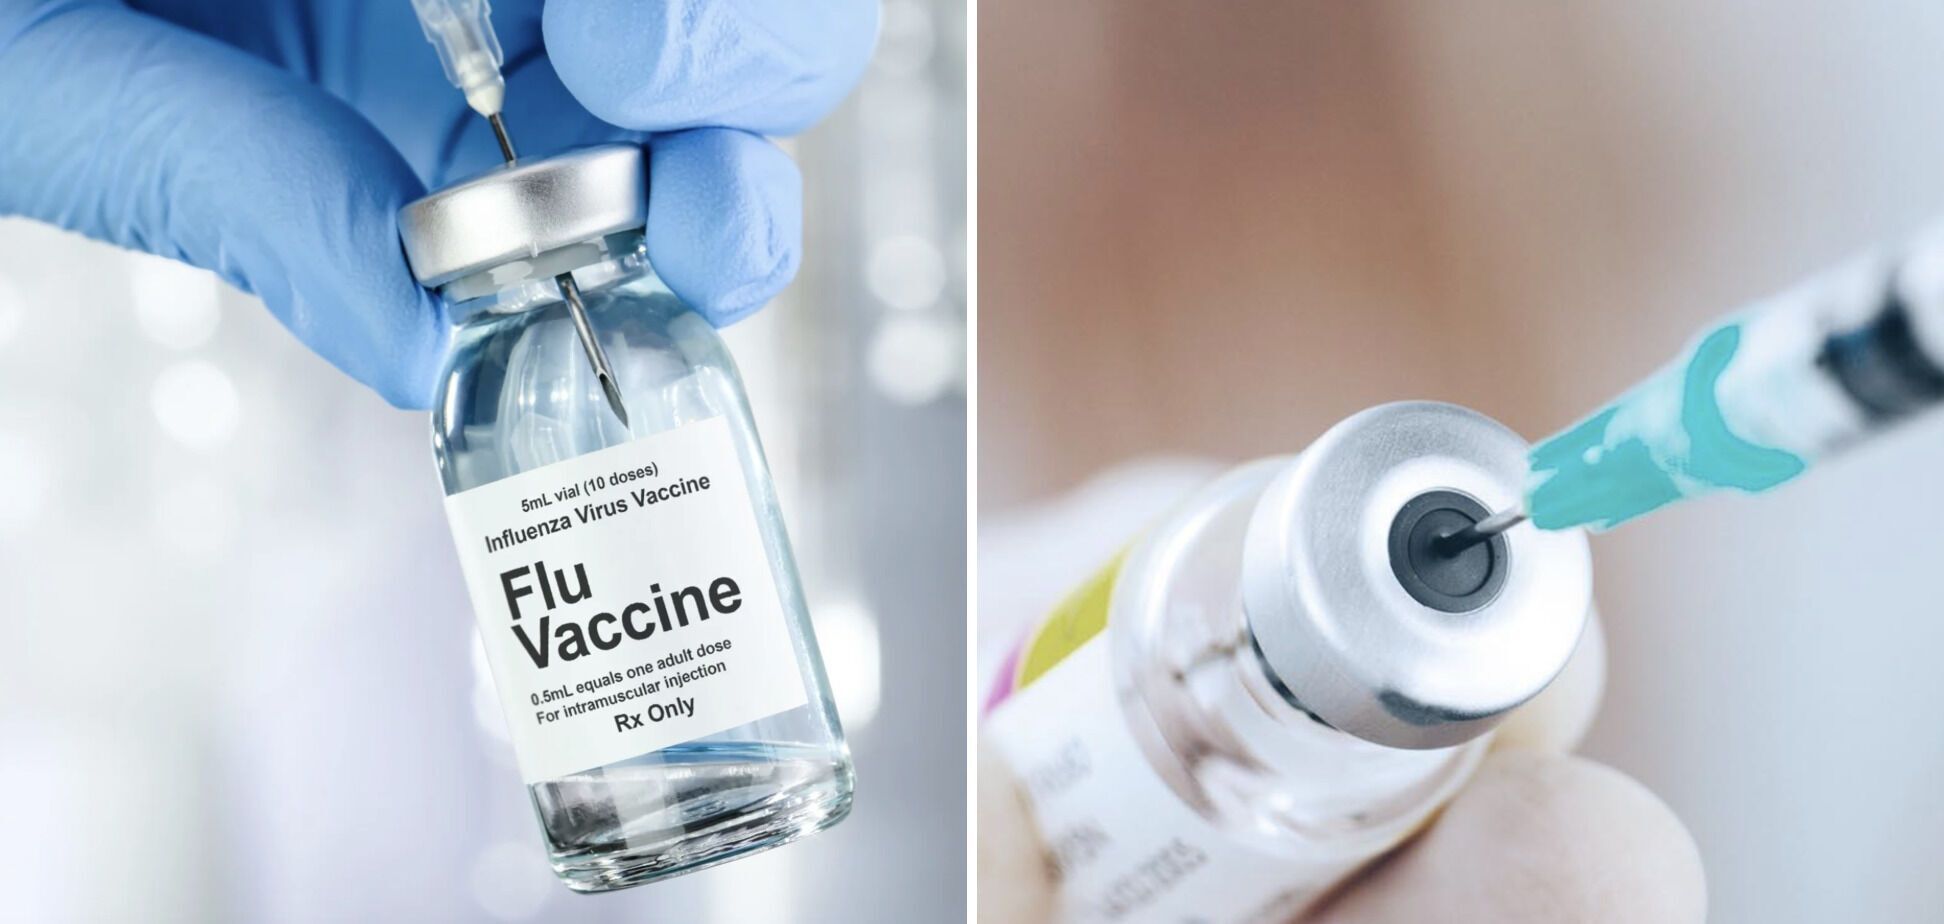 This season, there will be four strains of the flu circulating: doctors have informed about what to prepare for